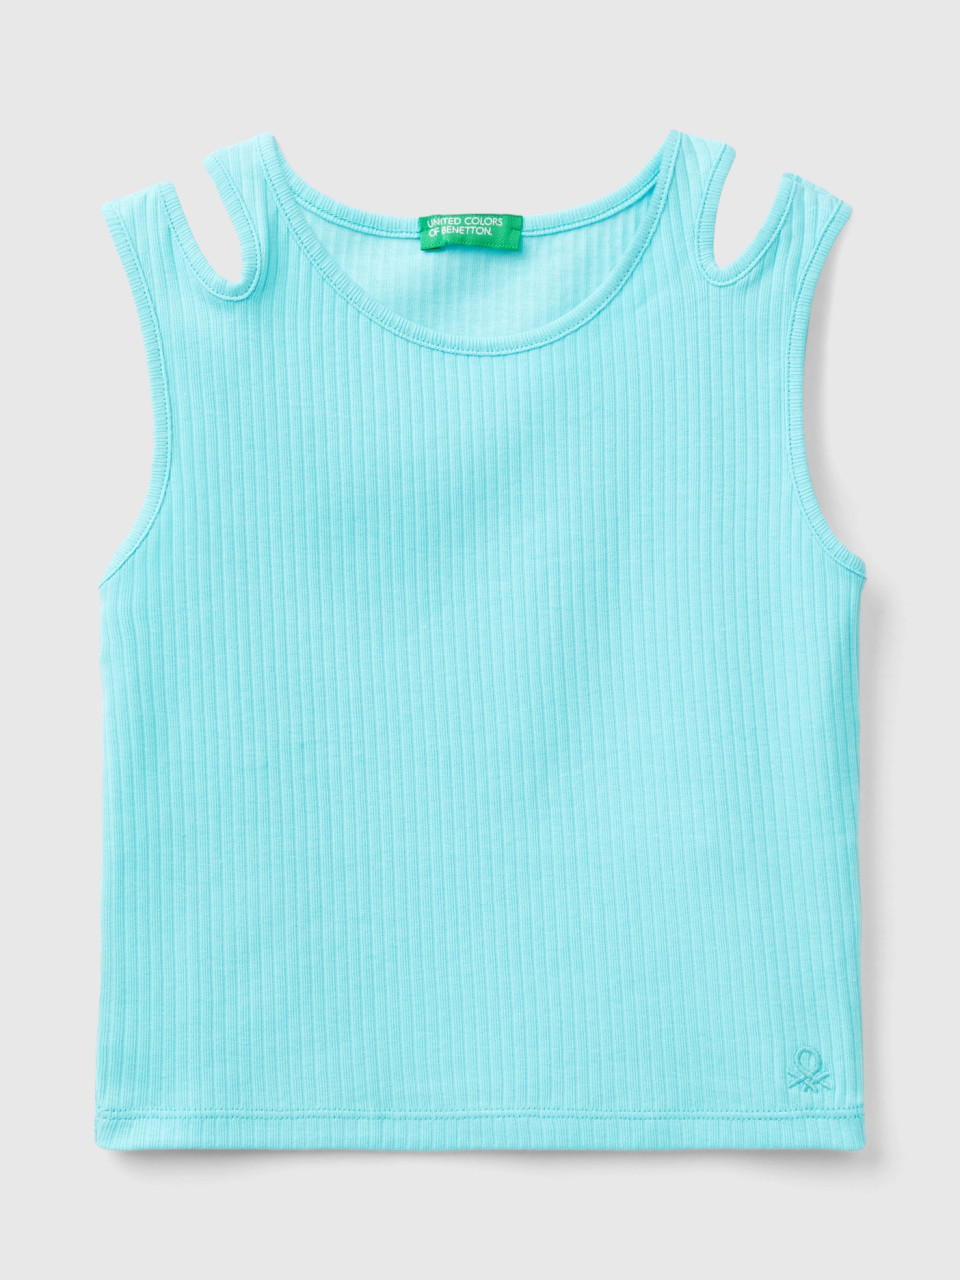 Benetton, Ribbed Cut-out Tank Top, Turquoise, Kids